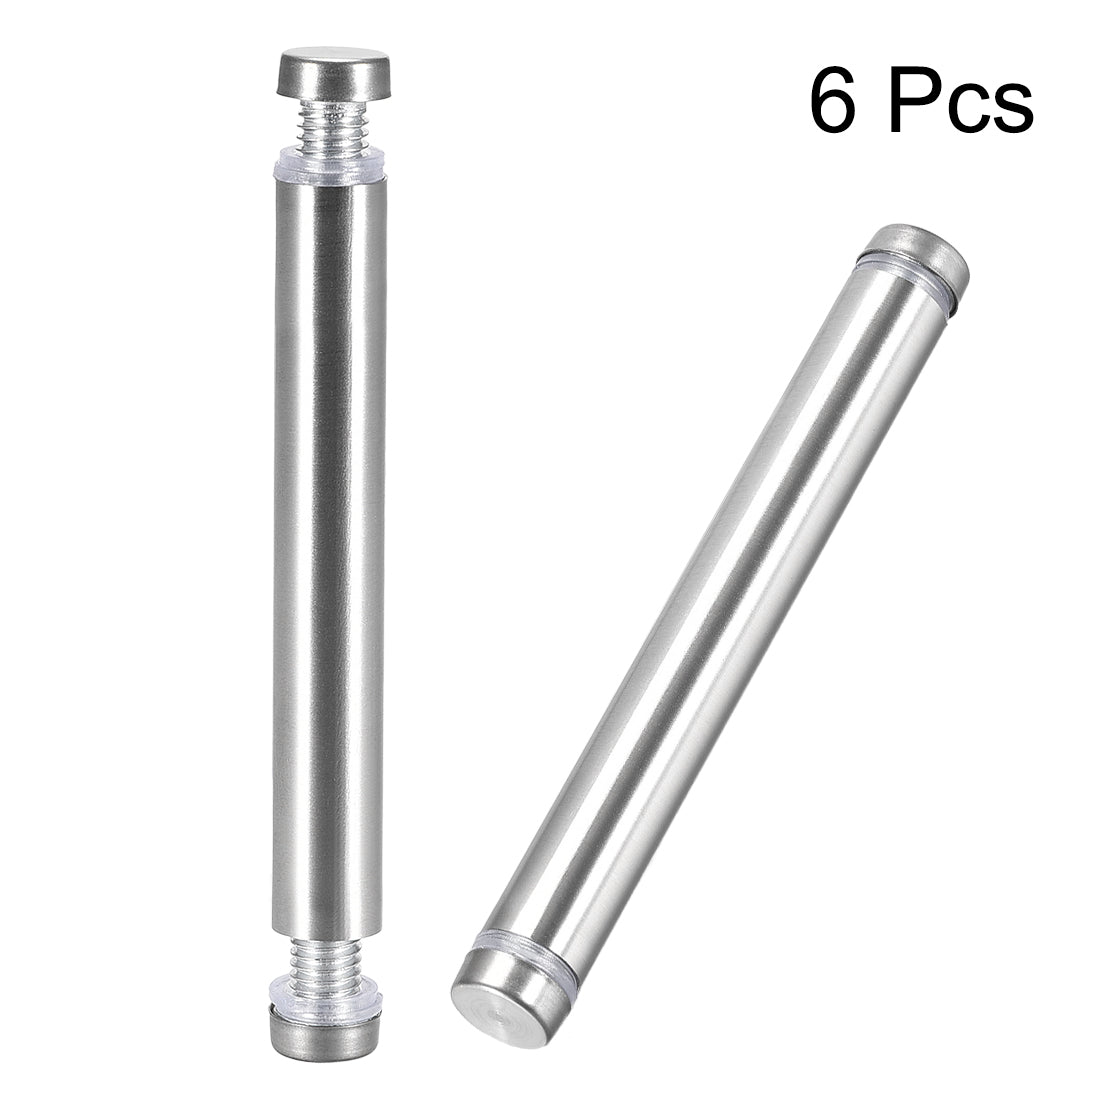 uxcell Uxcell Glass Standoff Double Head Stainless Steel Standoff Holder 12mm x 94mm 6 Pcs